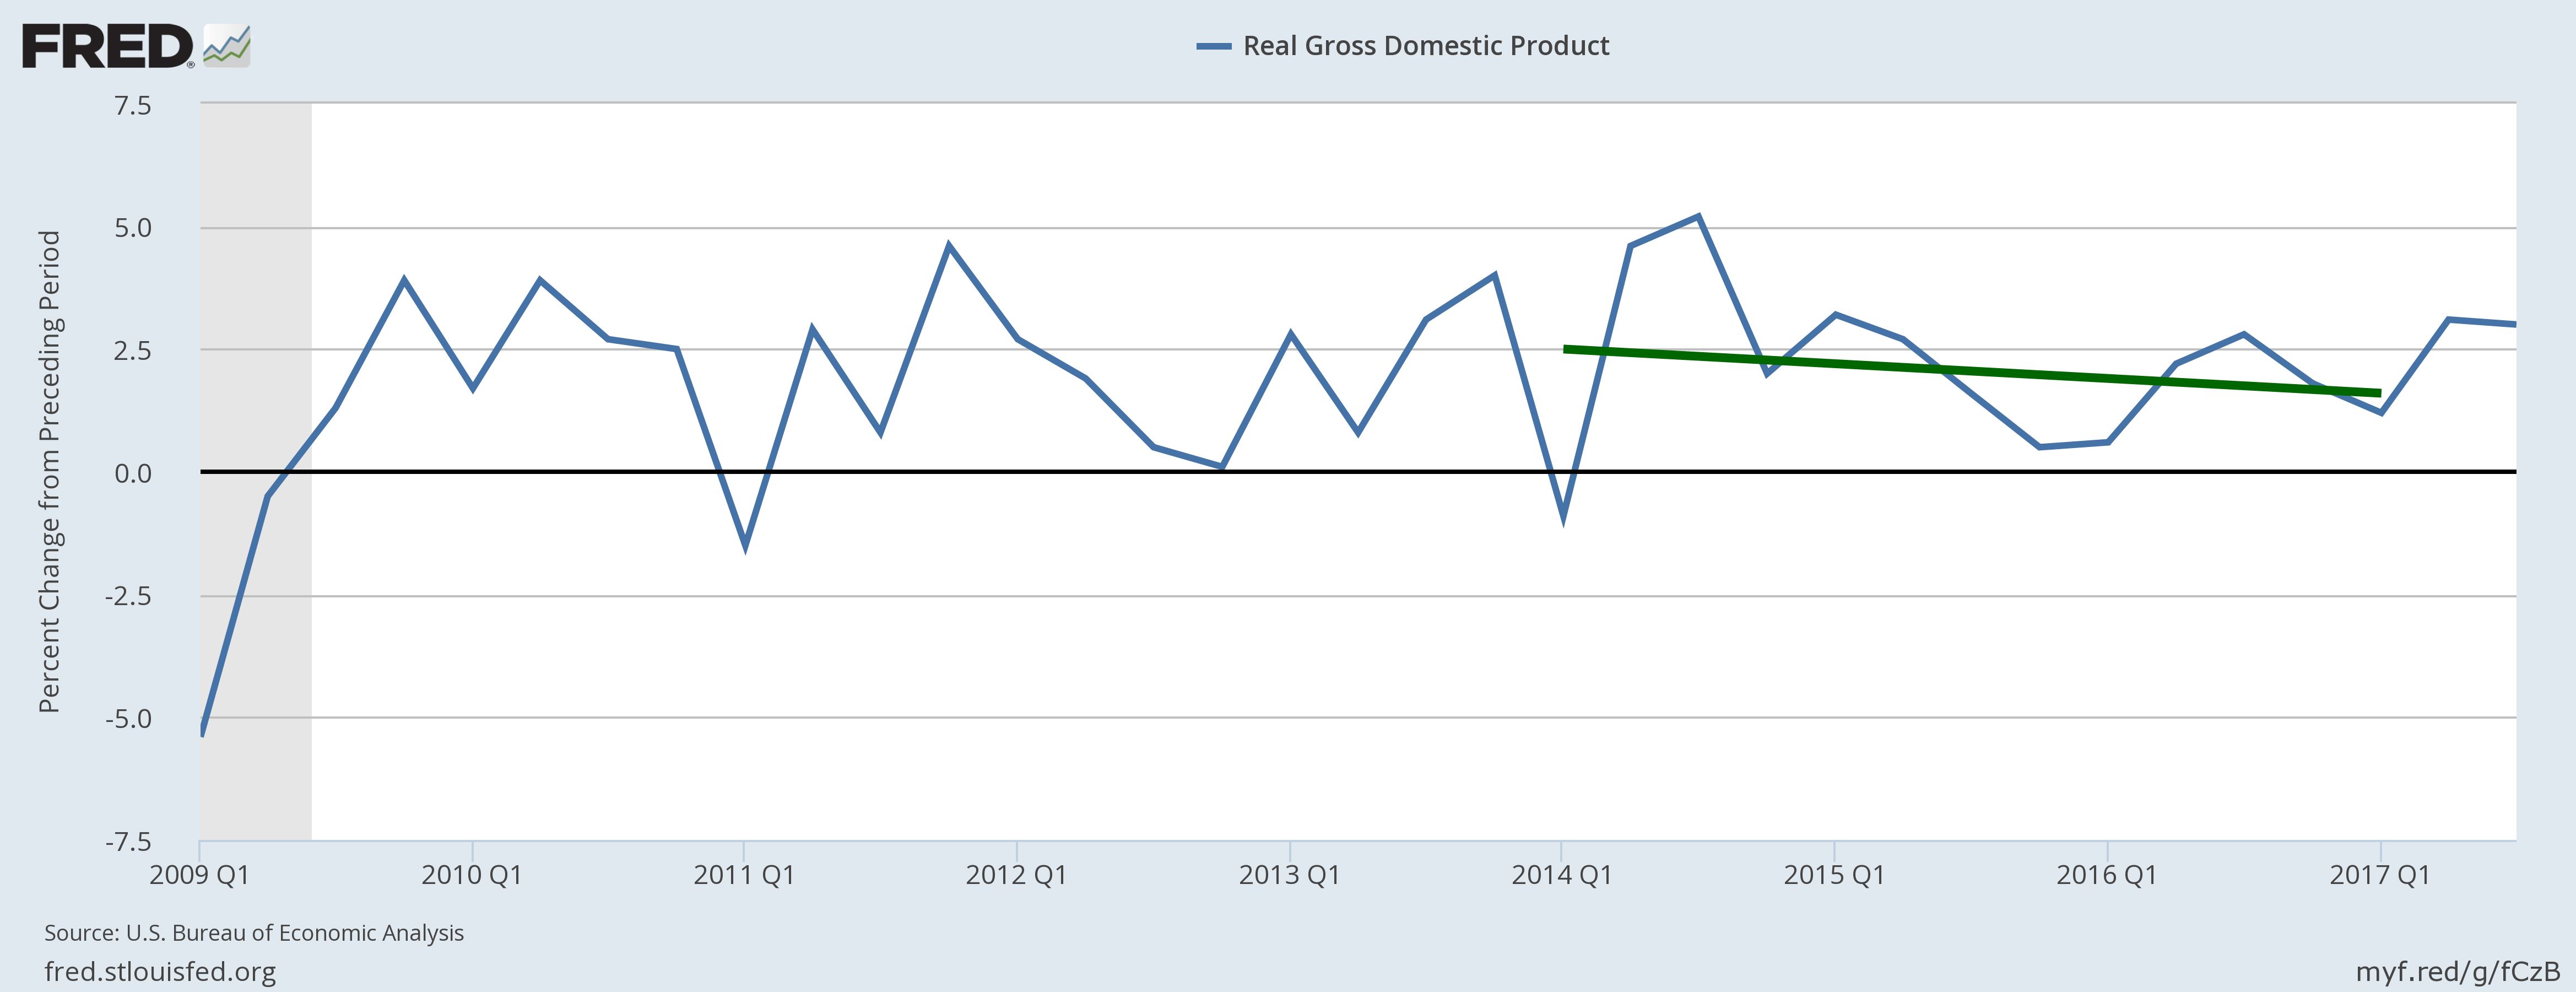 US real GDP growth from Q1 2009 to Q3 2017. The green line is a linear fit to the GDP over the three years from Q1 2014 to Q1 2017.